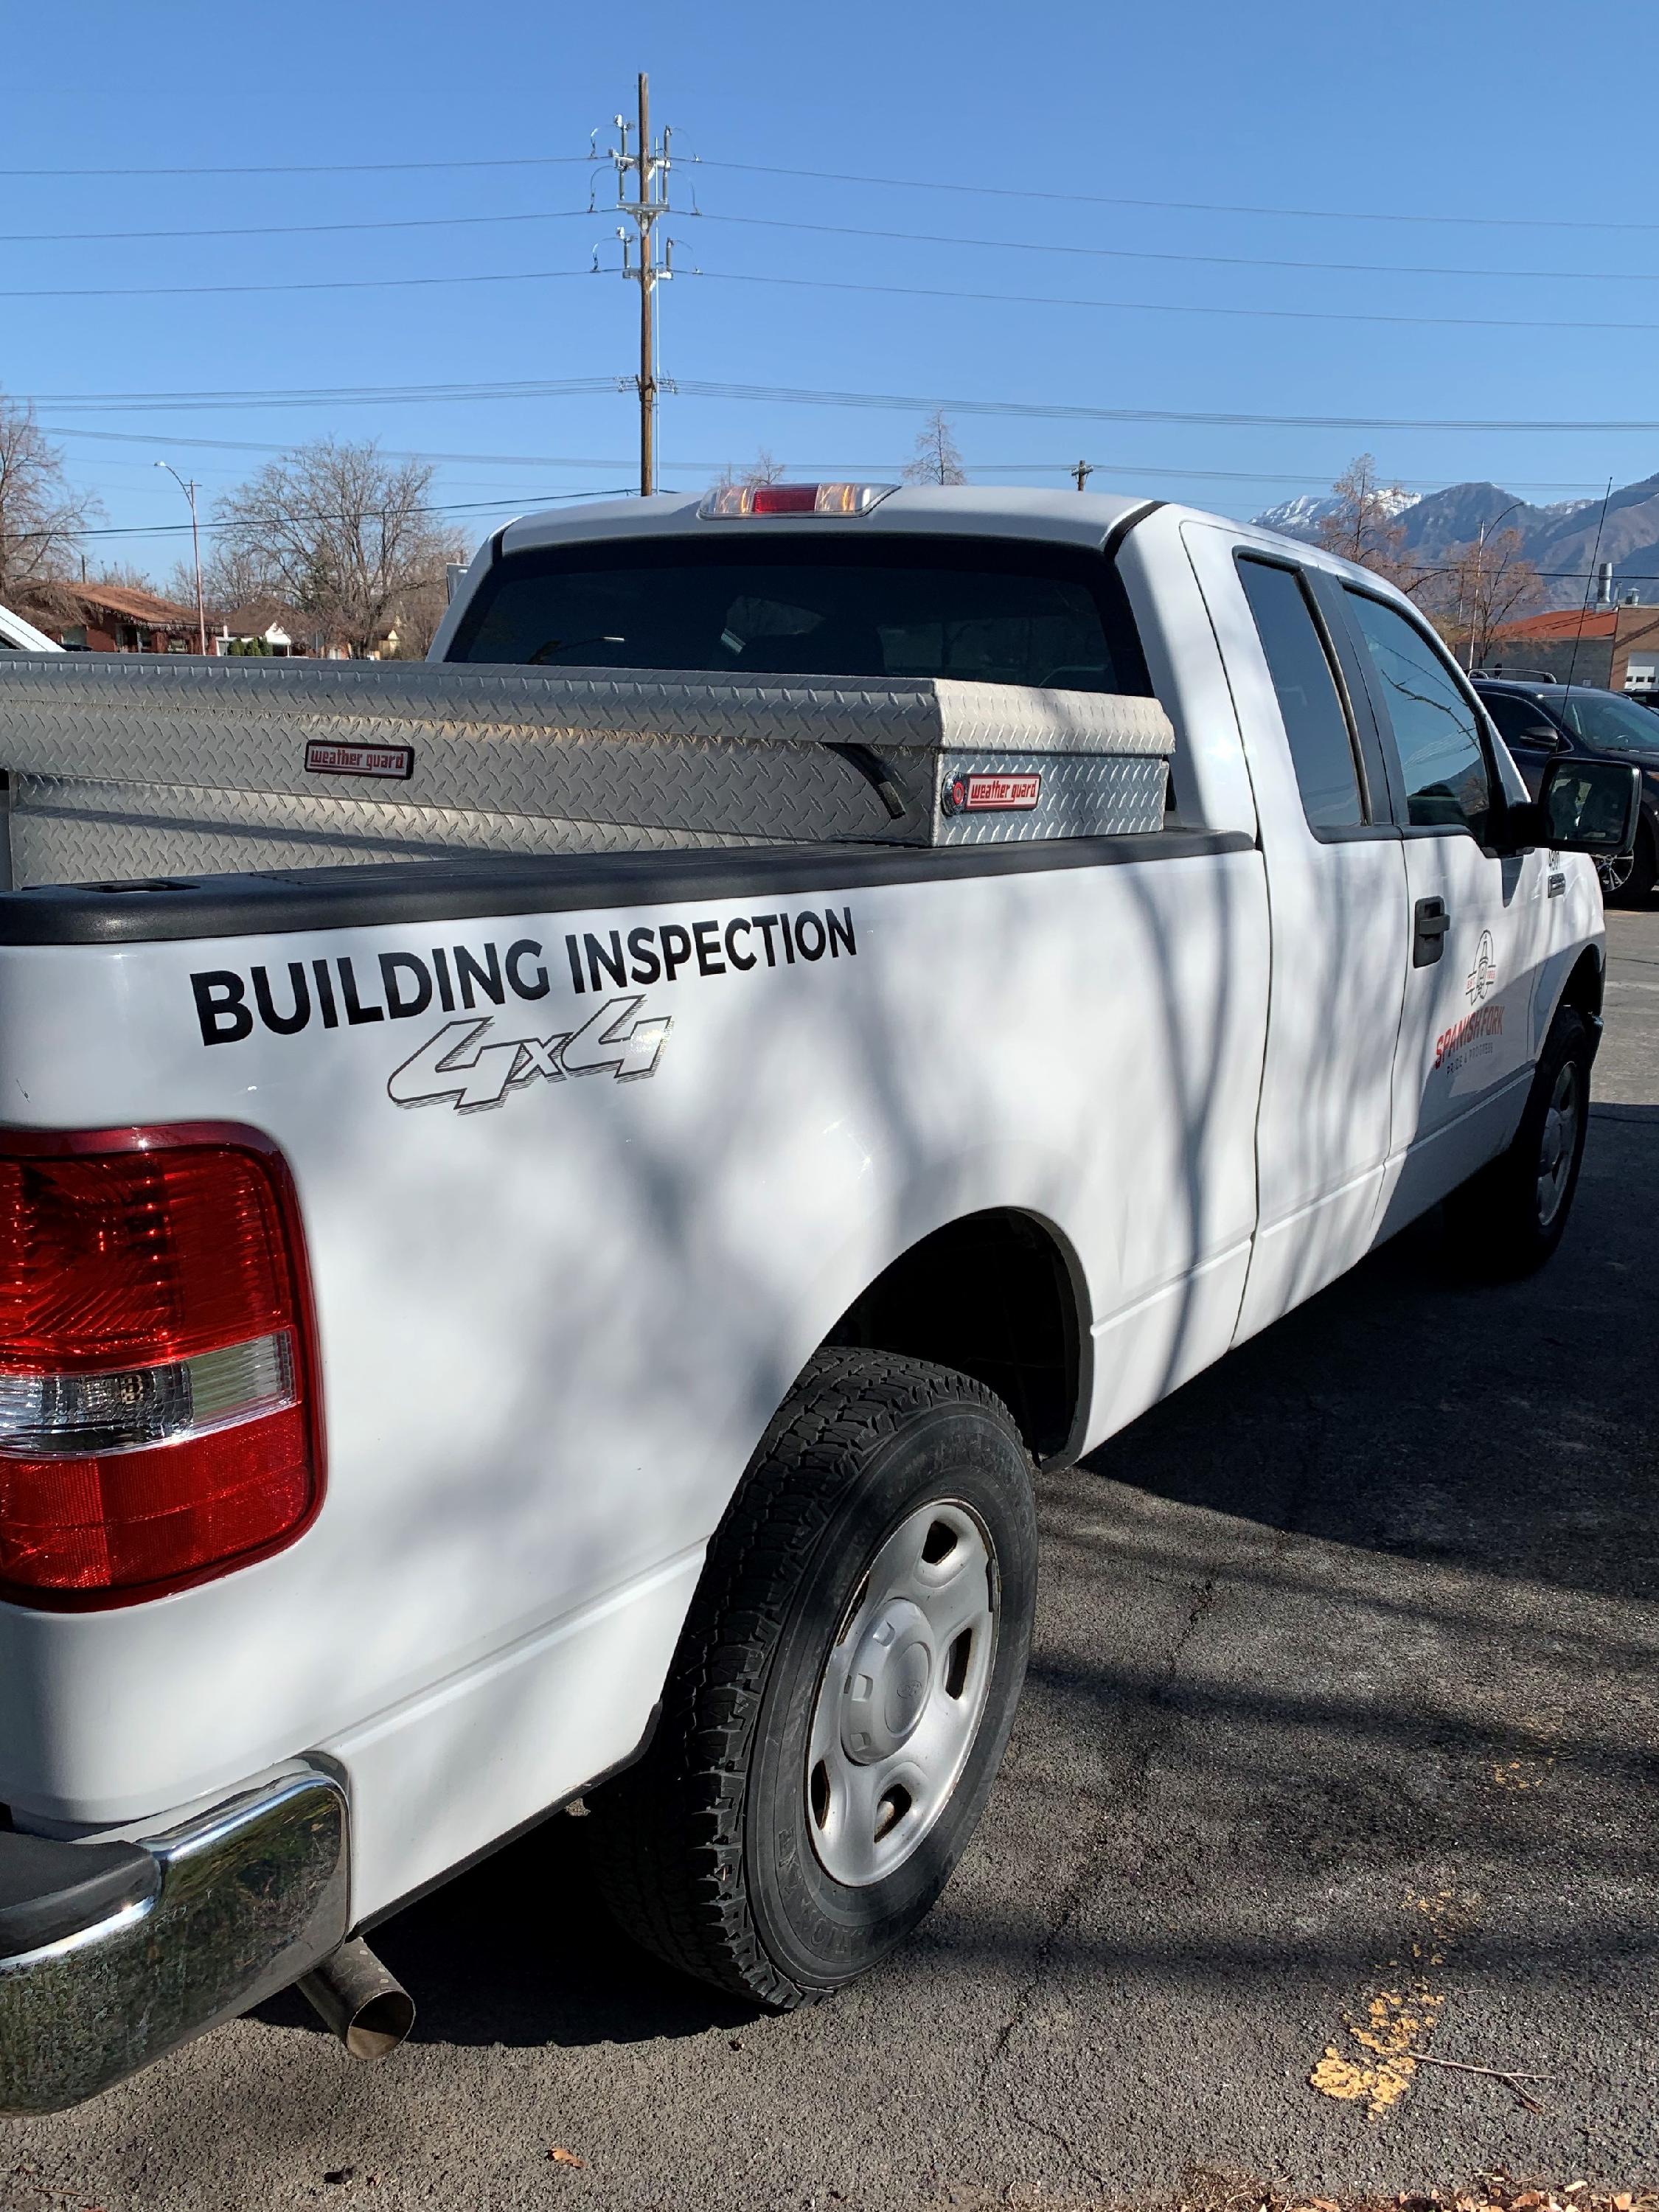 Building Inspection truck